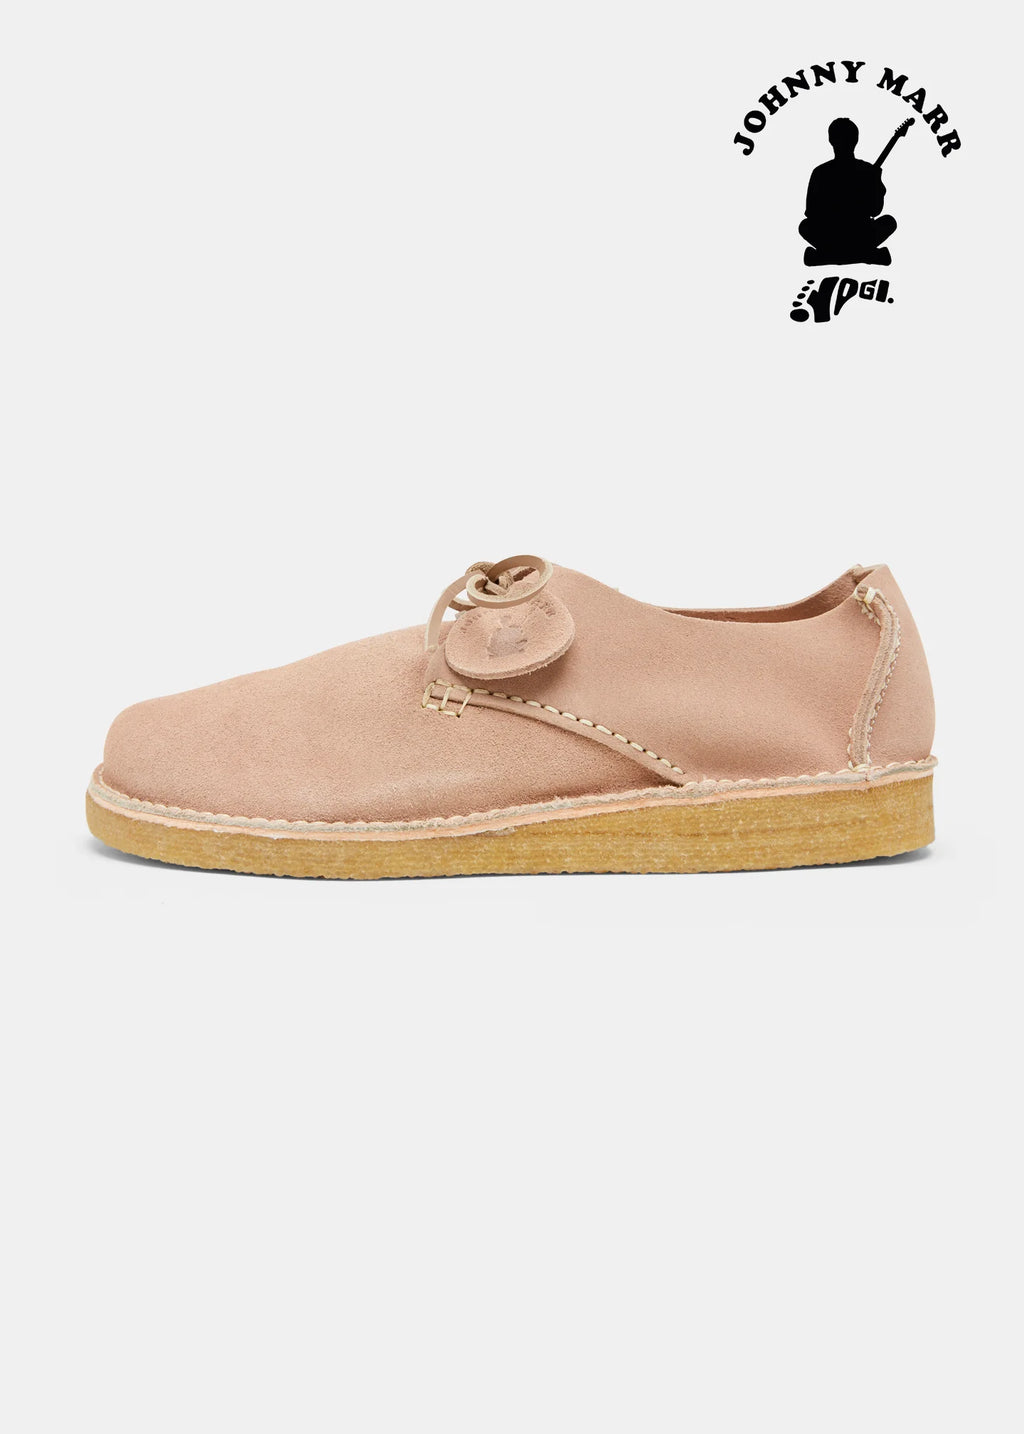 Johnny Marr Rishi Suede Shoe Nude Pink